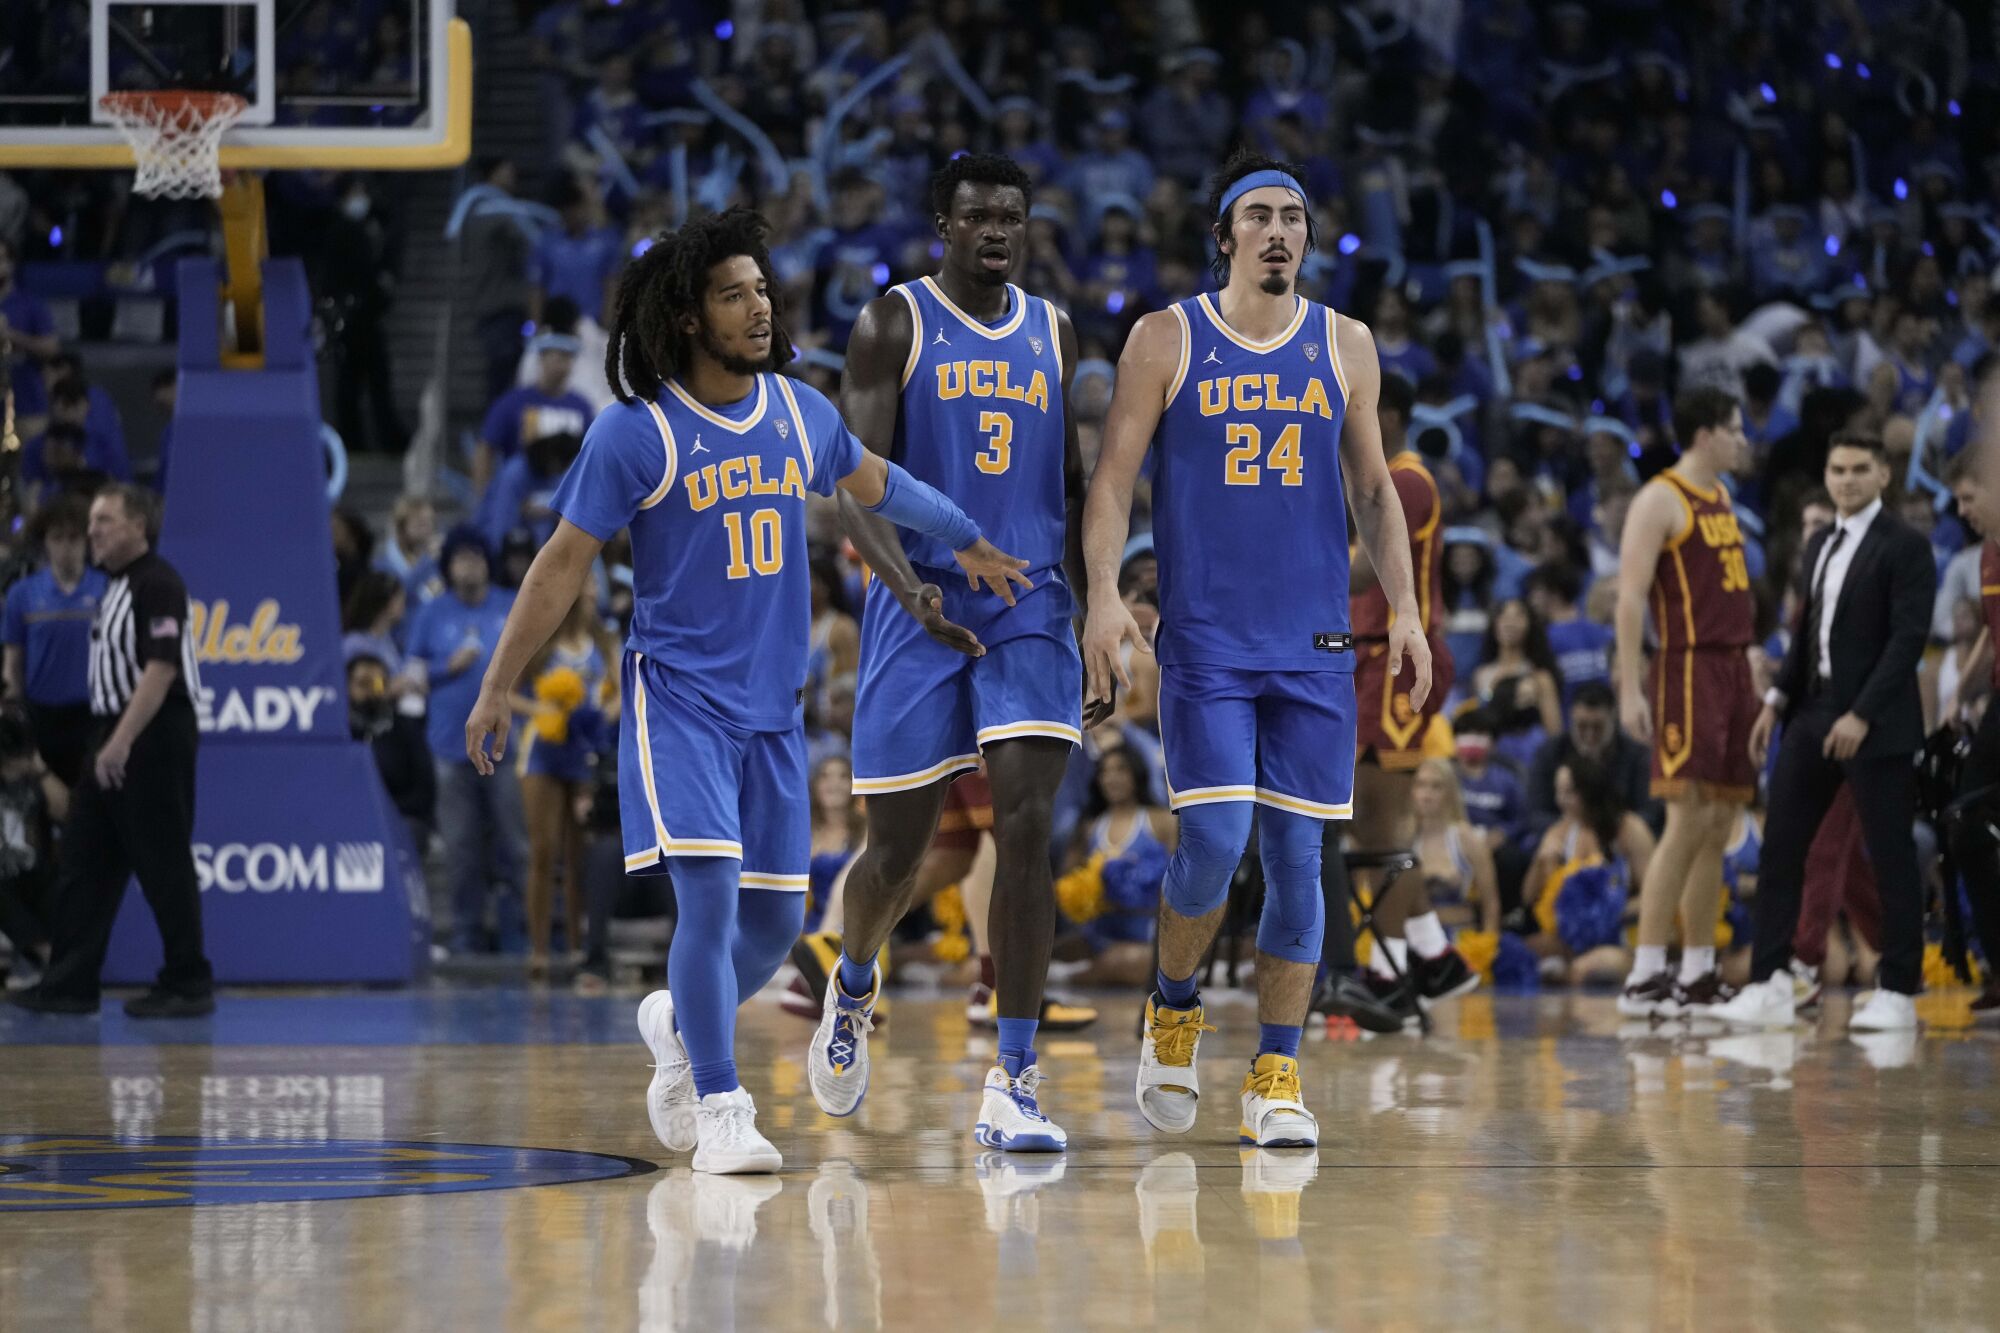 UCLA's Tyger Campbell, Adem Bona and Jaime Jaquez Jr. walk on the court during the second half against USC.